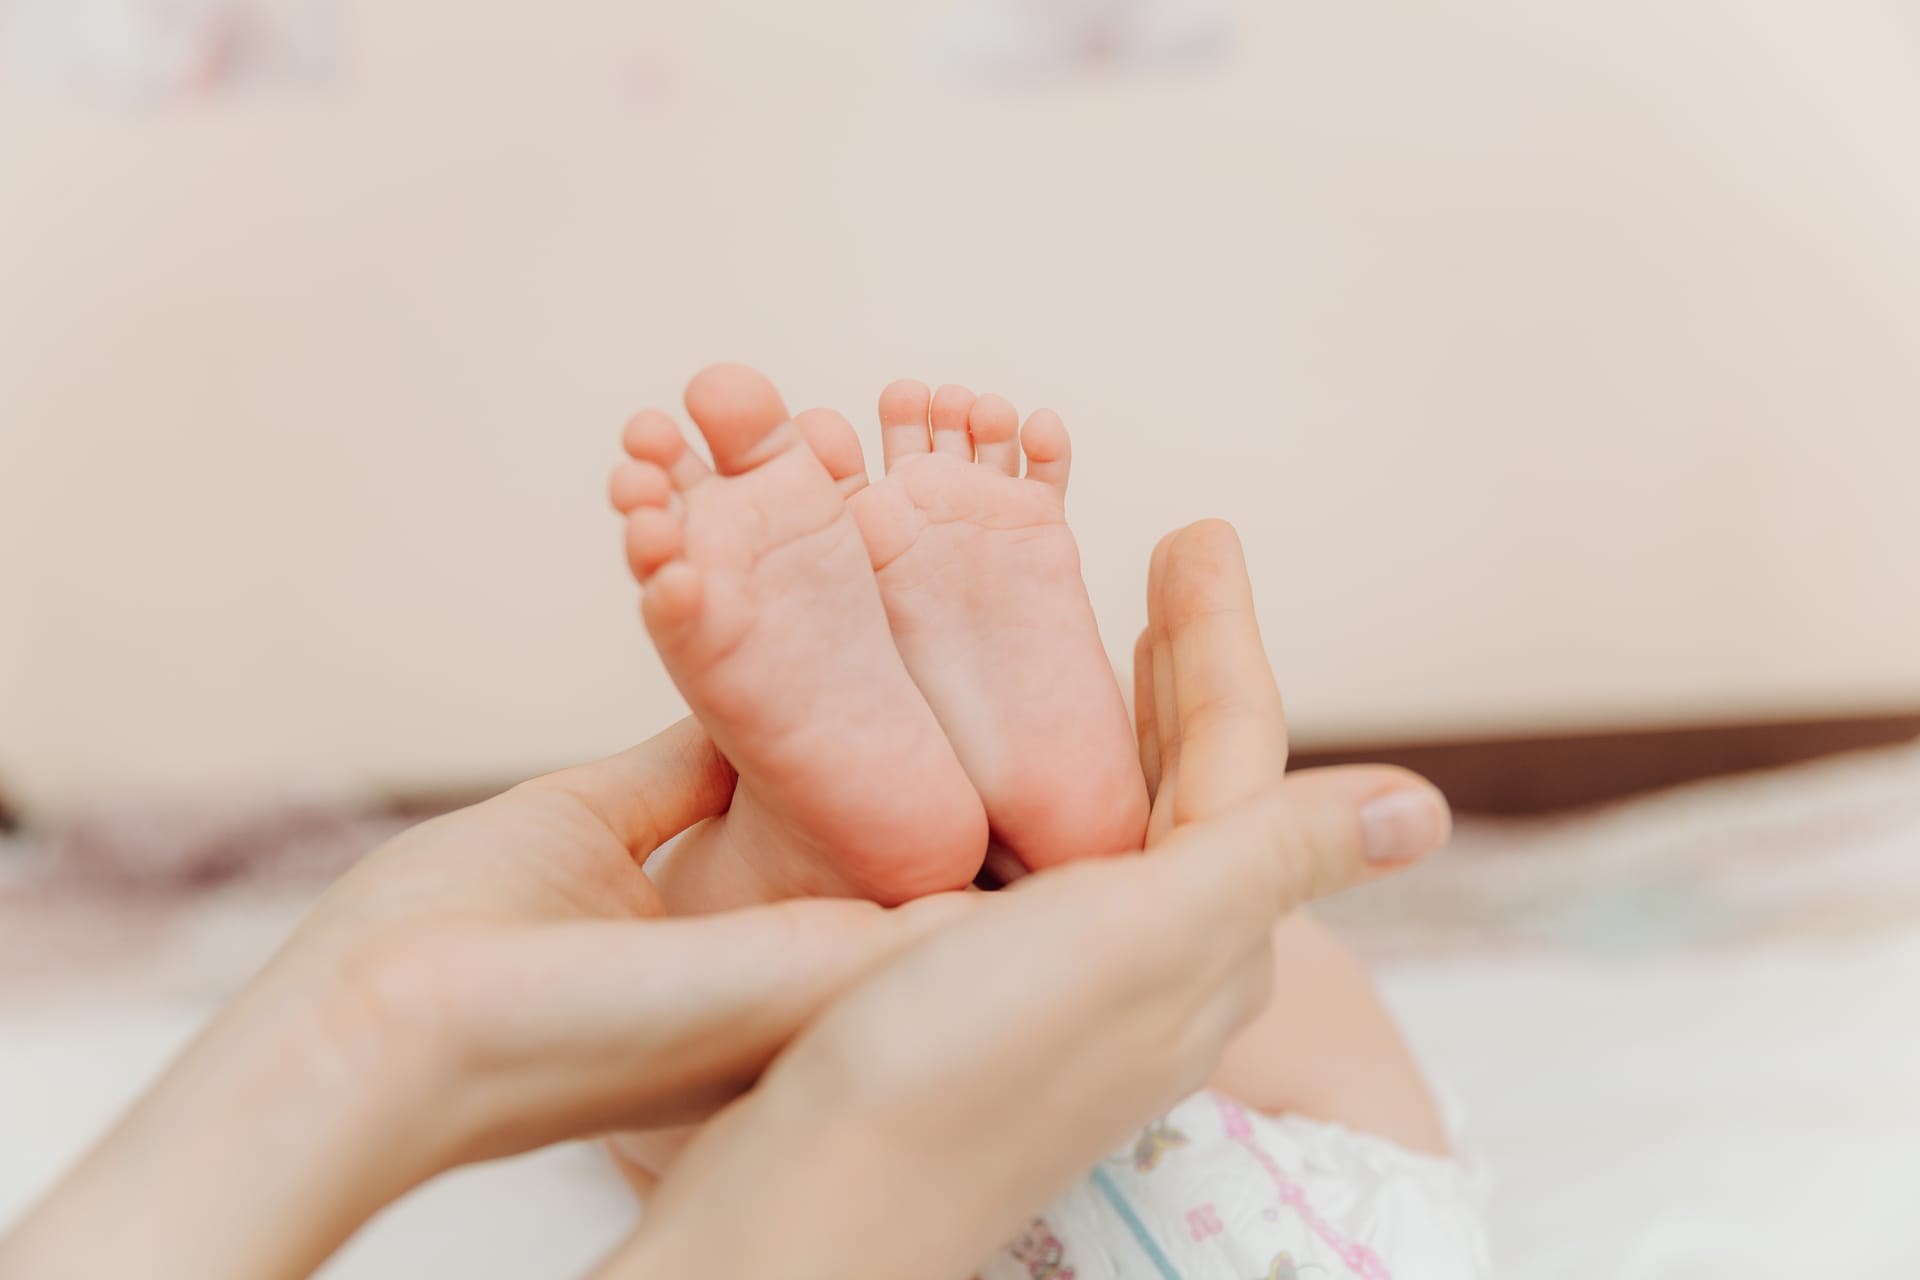 Hands mom her child happy family concept baby feet image